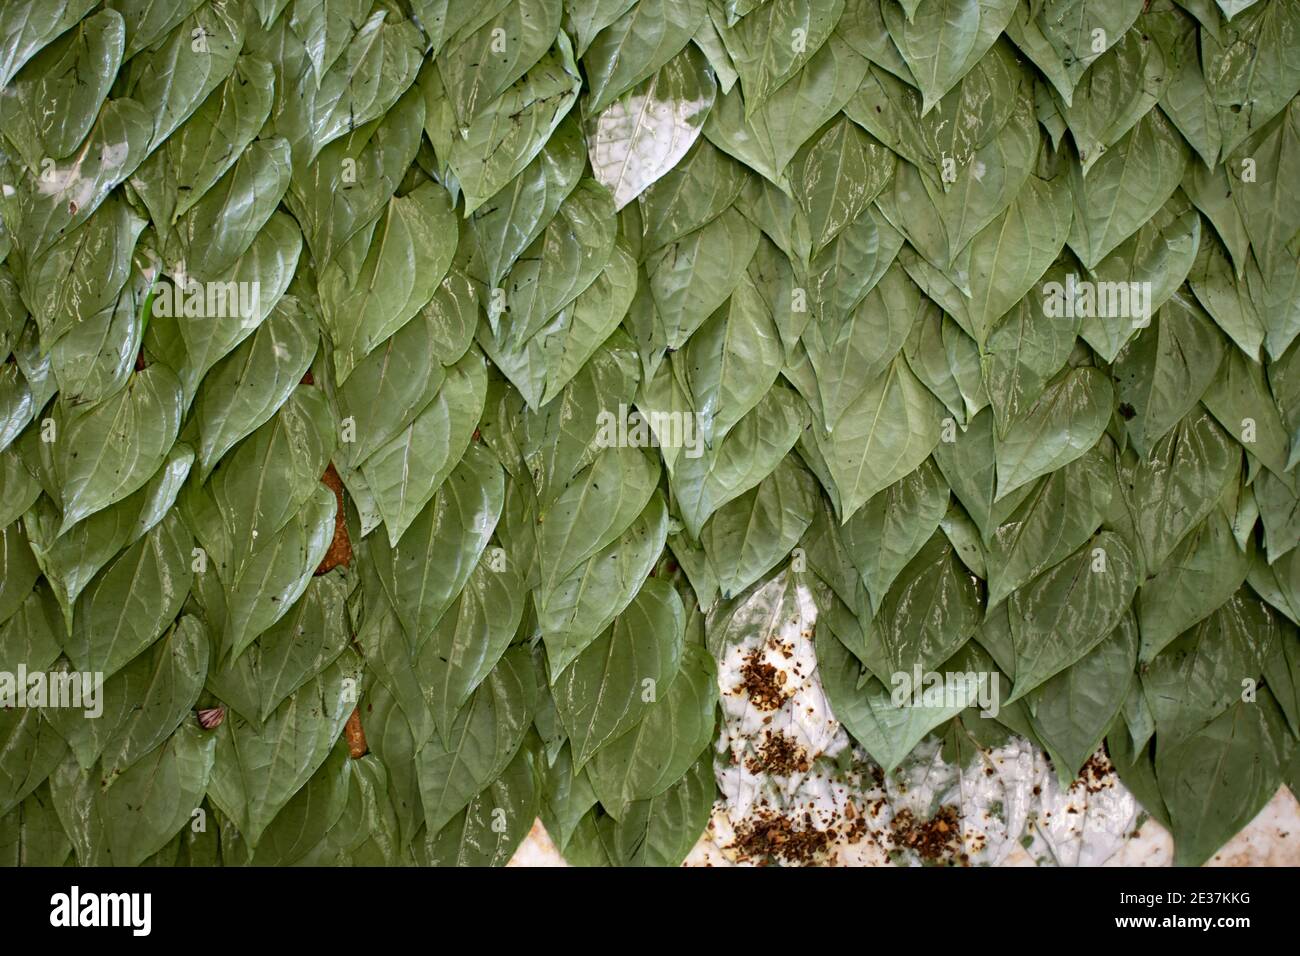 Background of green betel vine leaves with areca nut. Preparing traditional kwu-ya, paan, chewing tobacco in Myanmar Stock Photo